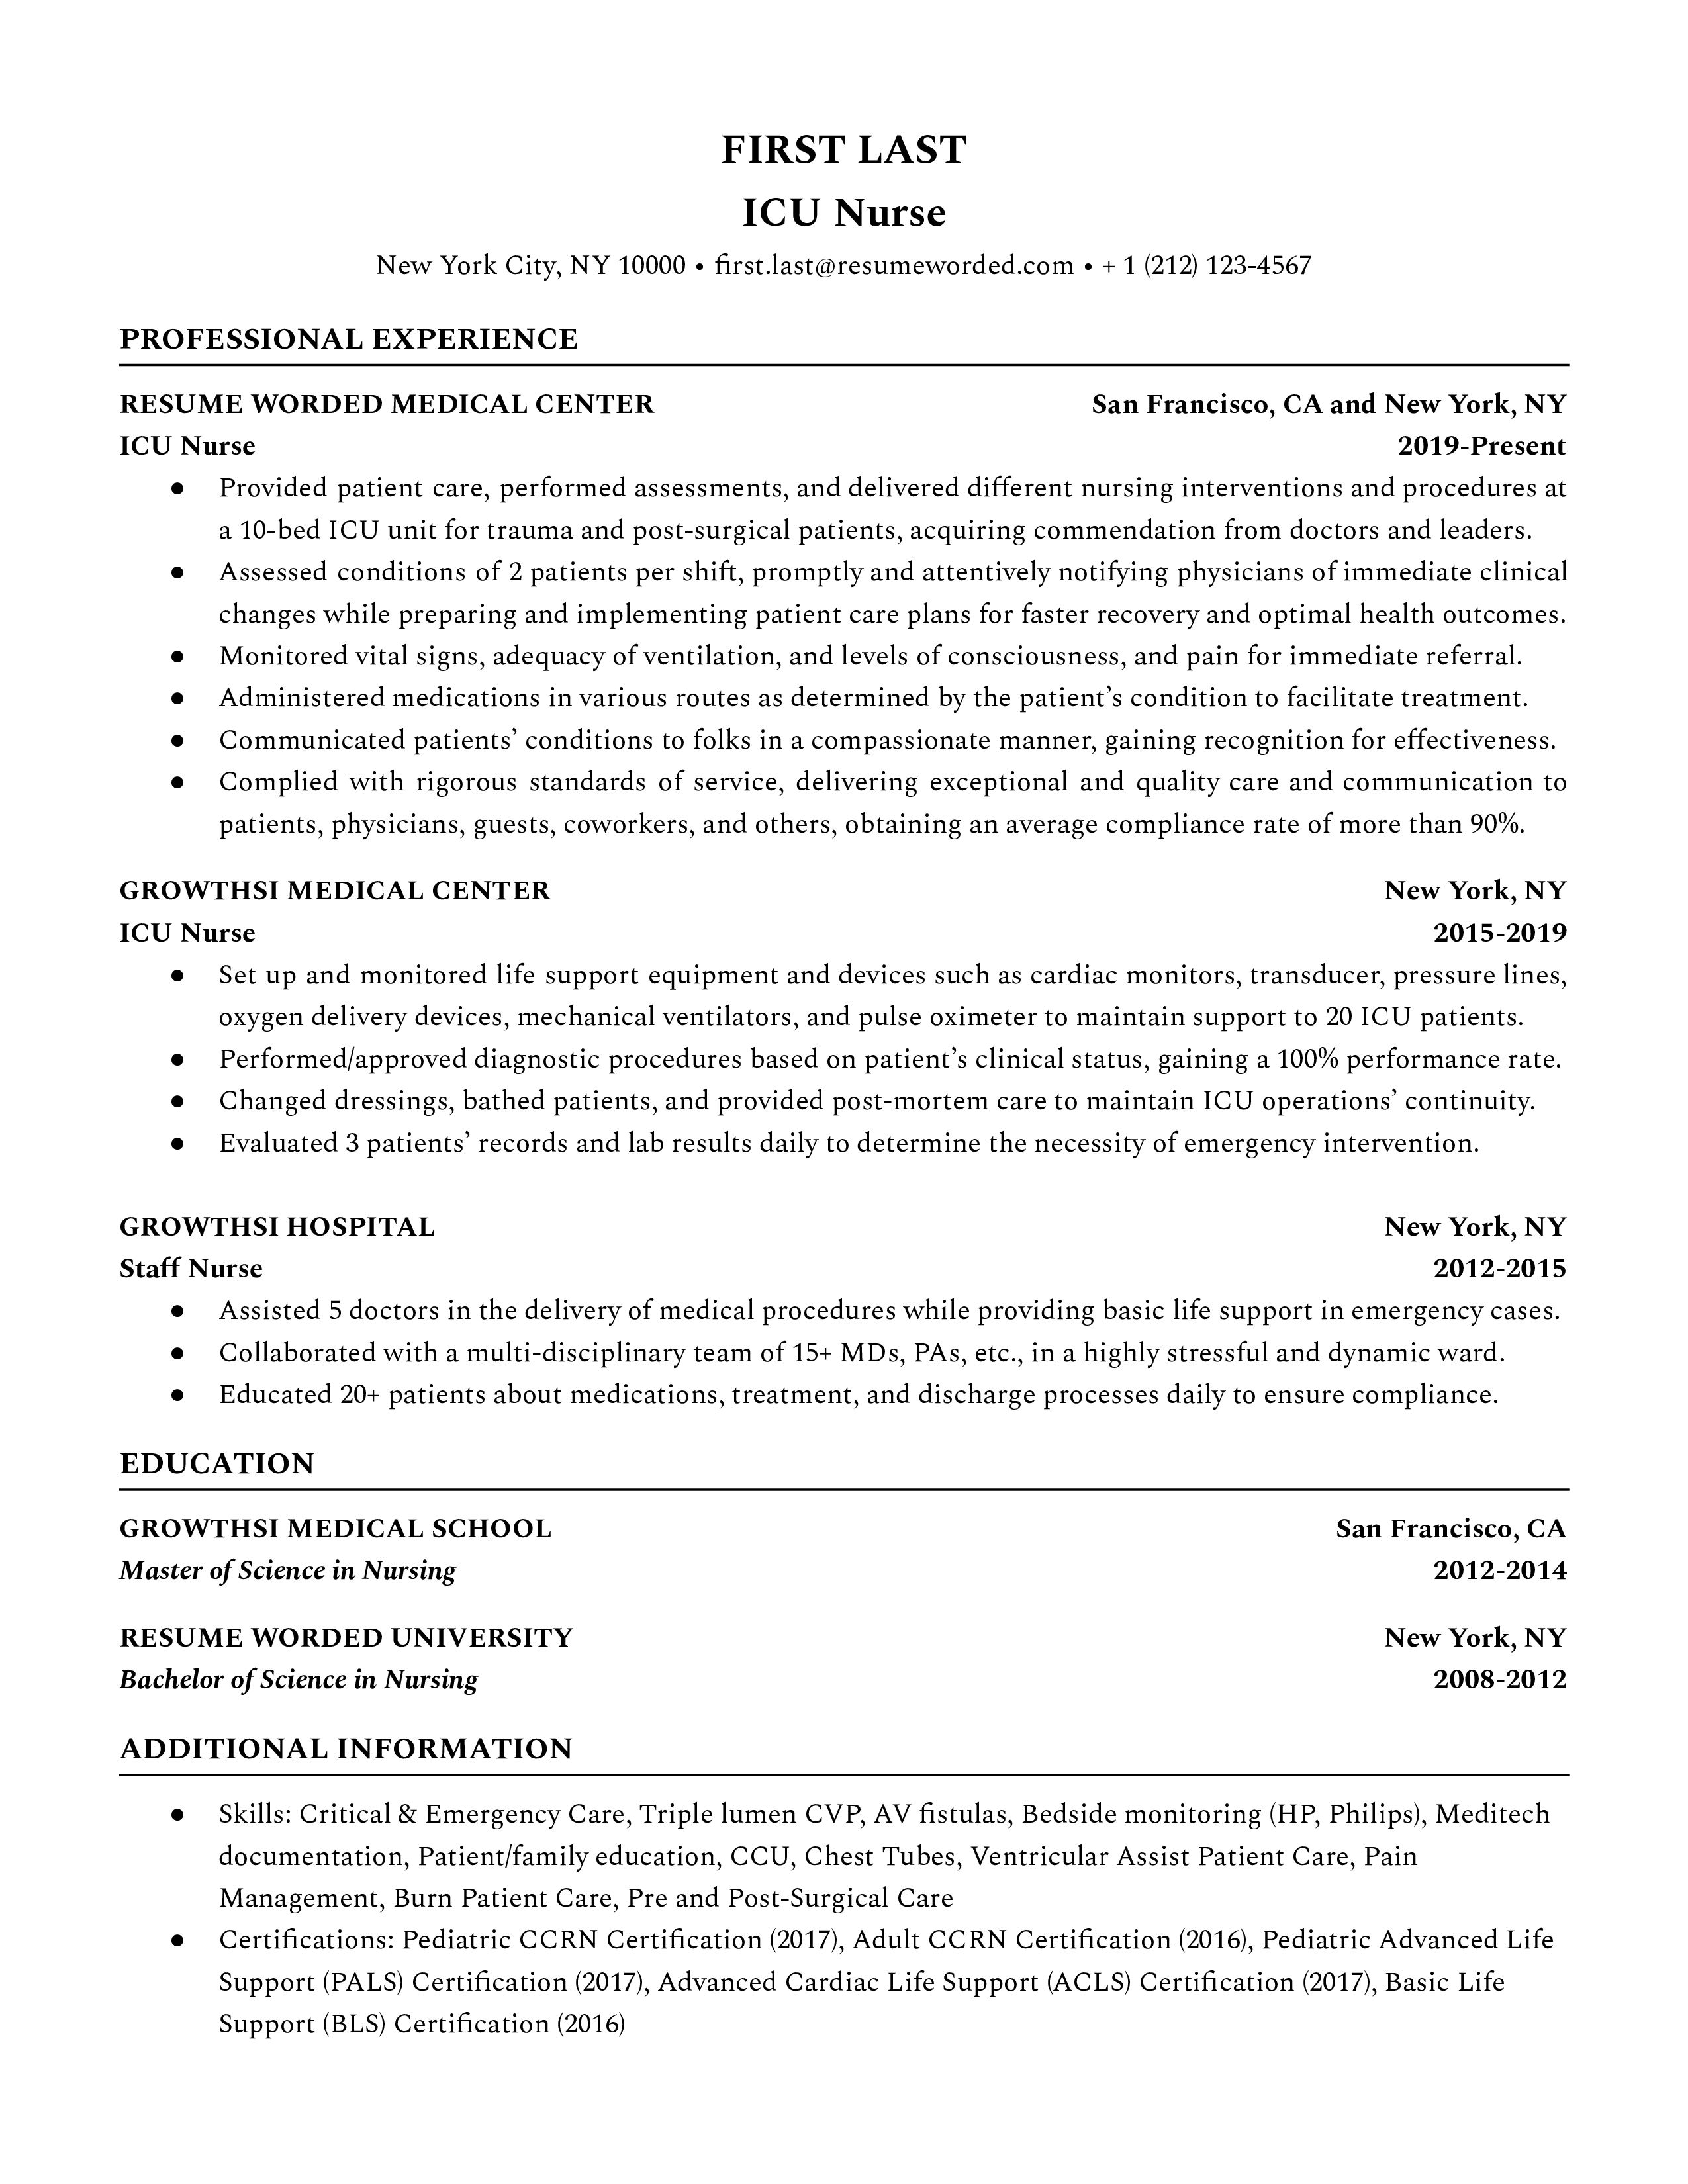 ICU nurse resume template sample focusing specifically on ICU experience and listing additional certifications